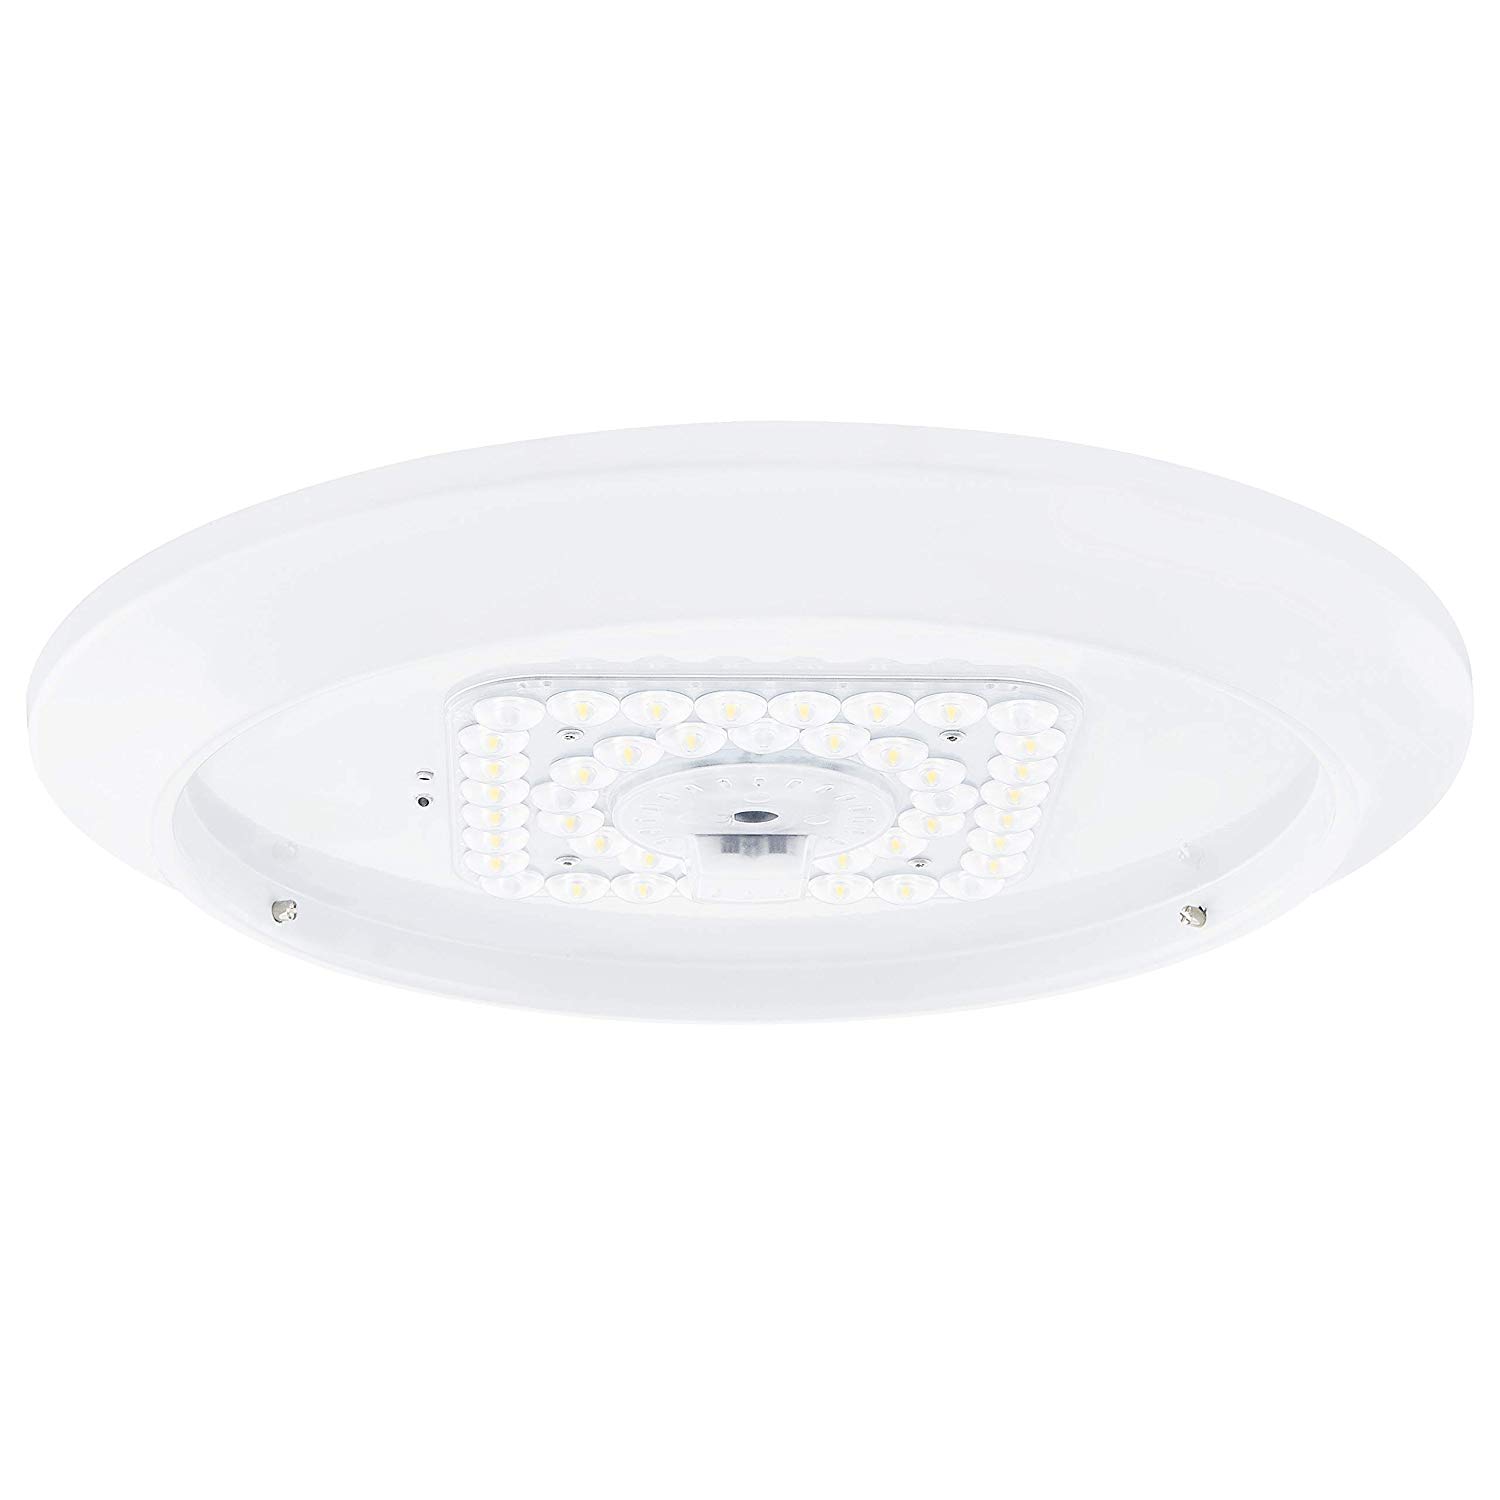 GRUENLICH LED Flush Mount Ceiling Lighting Fixture, 11 Inch Dimmable 19W (125W Replacement) 1170 Lumen, Metal Housing with White Finish, ETL and Damp Location Rated, 2-Pack